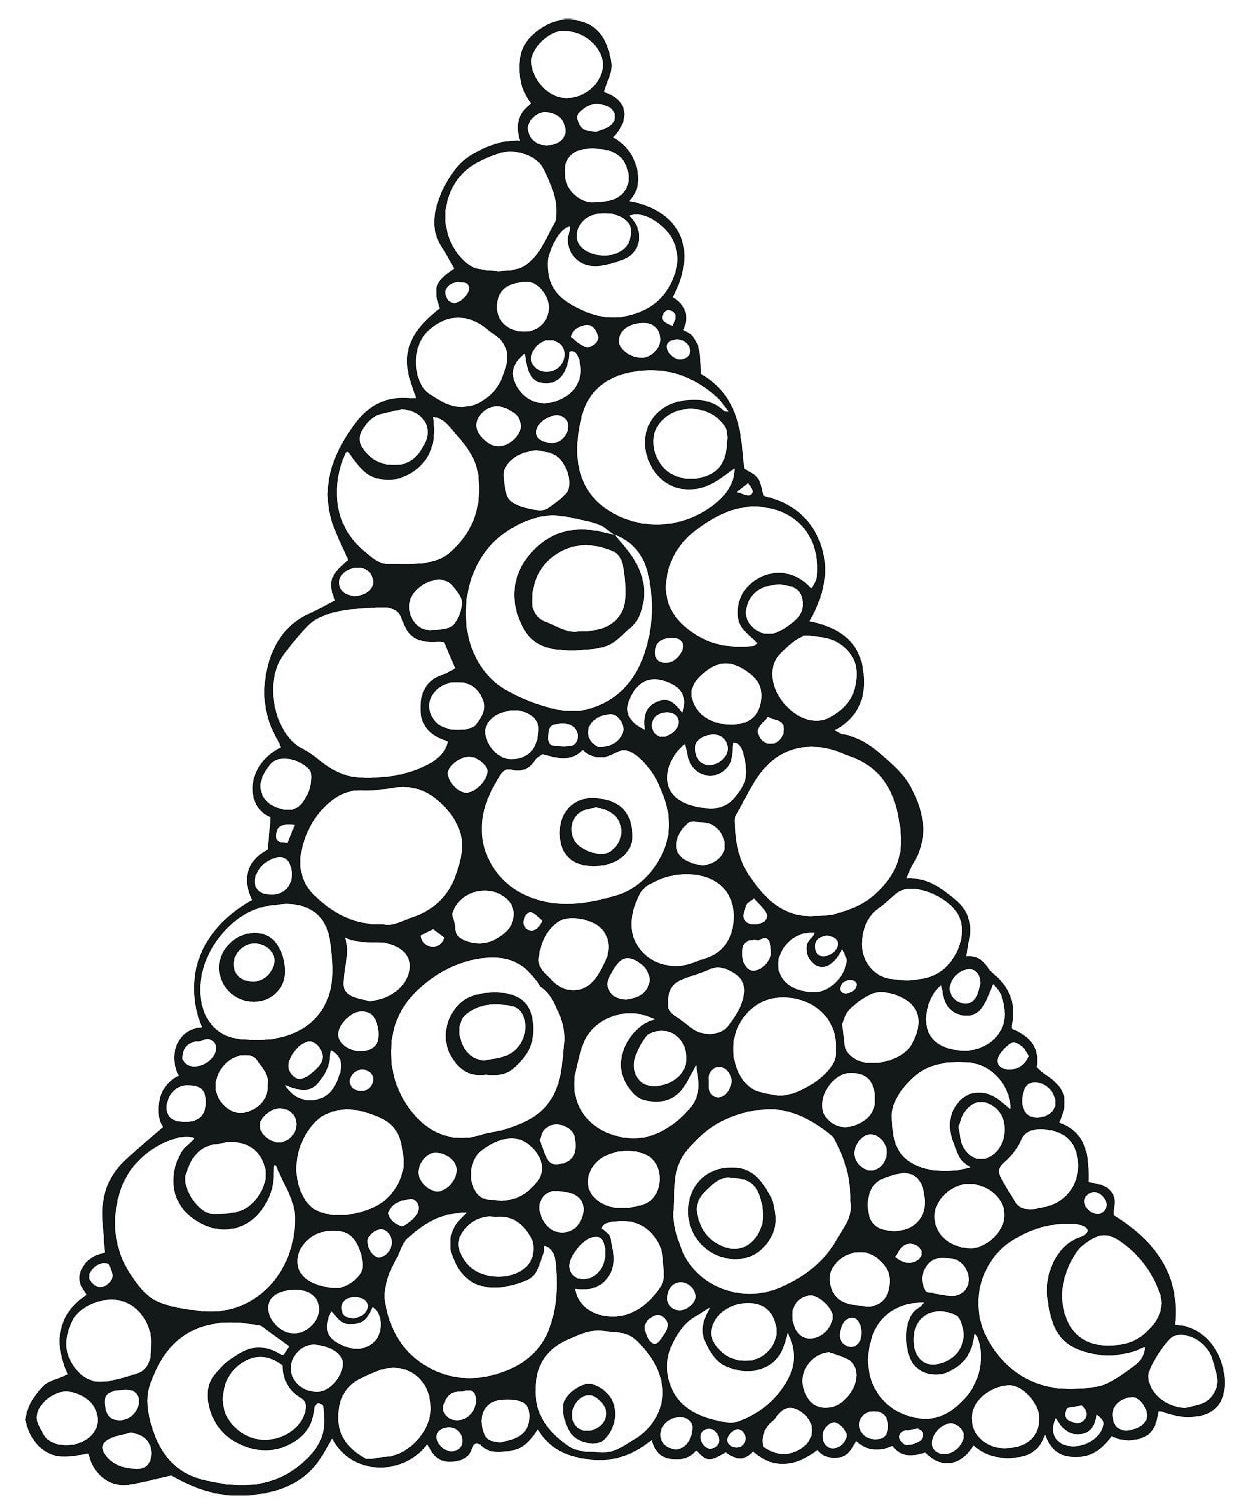 printable-christmas-tree-made-of-circles-coloring-pages-coloring-cool